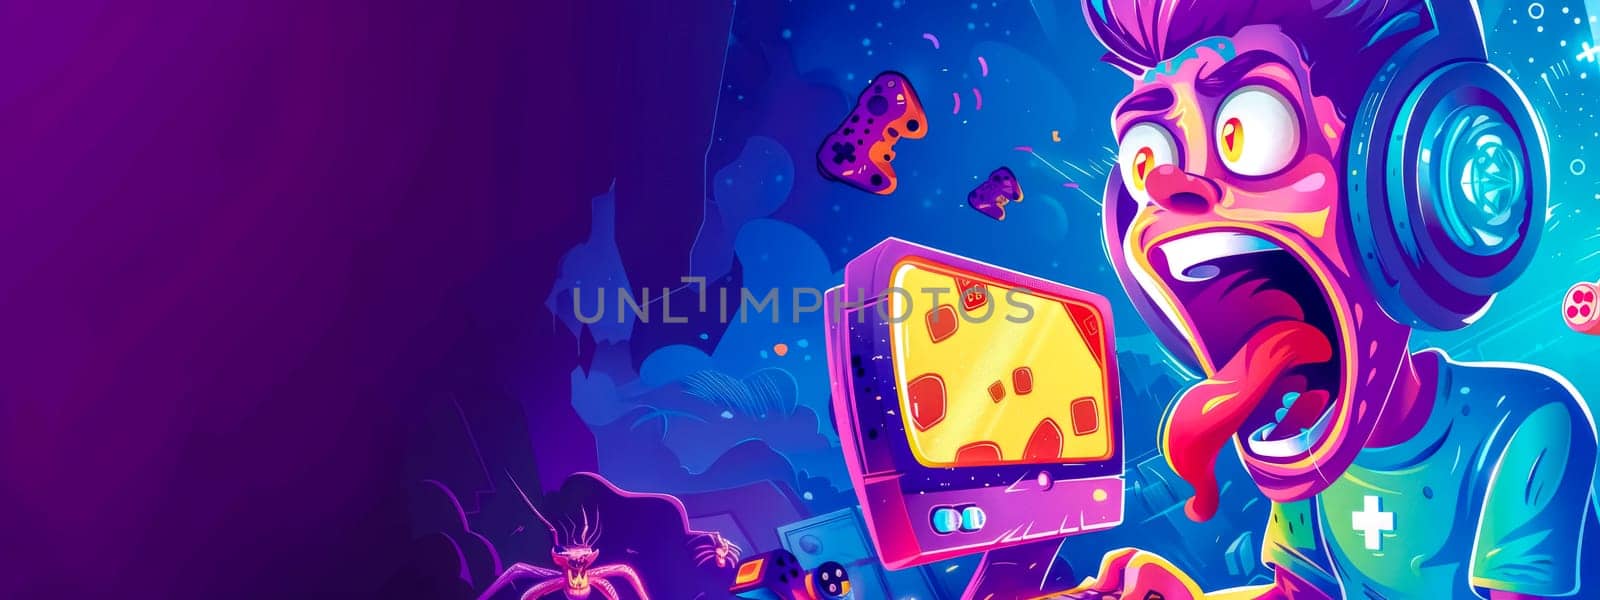 Bright, colorful illustration of an excited gamer in a whimsical space environment, surrounded by cosmic elements